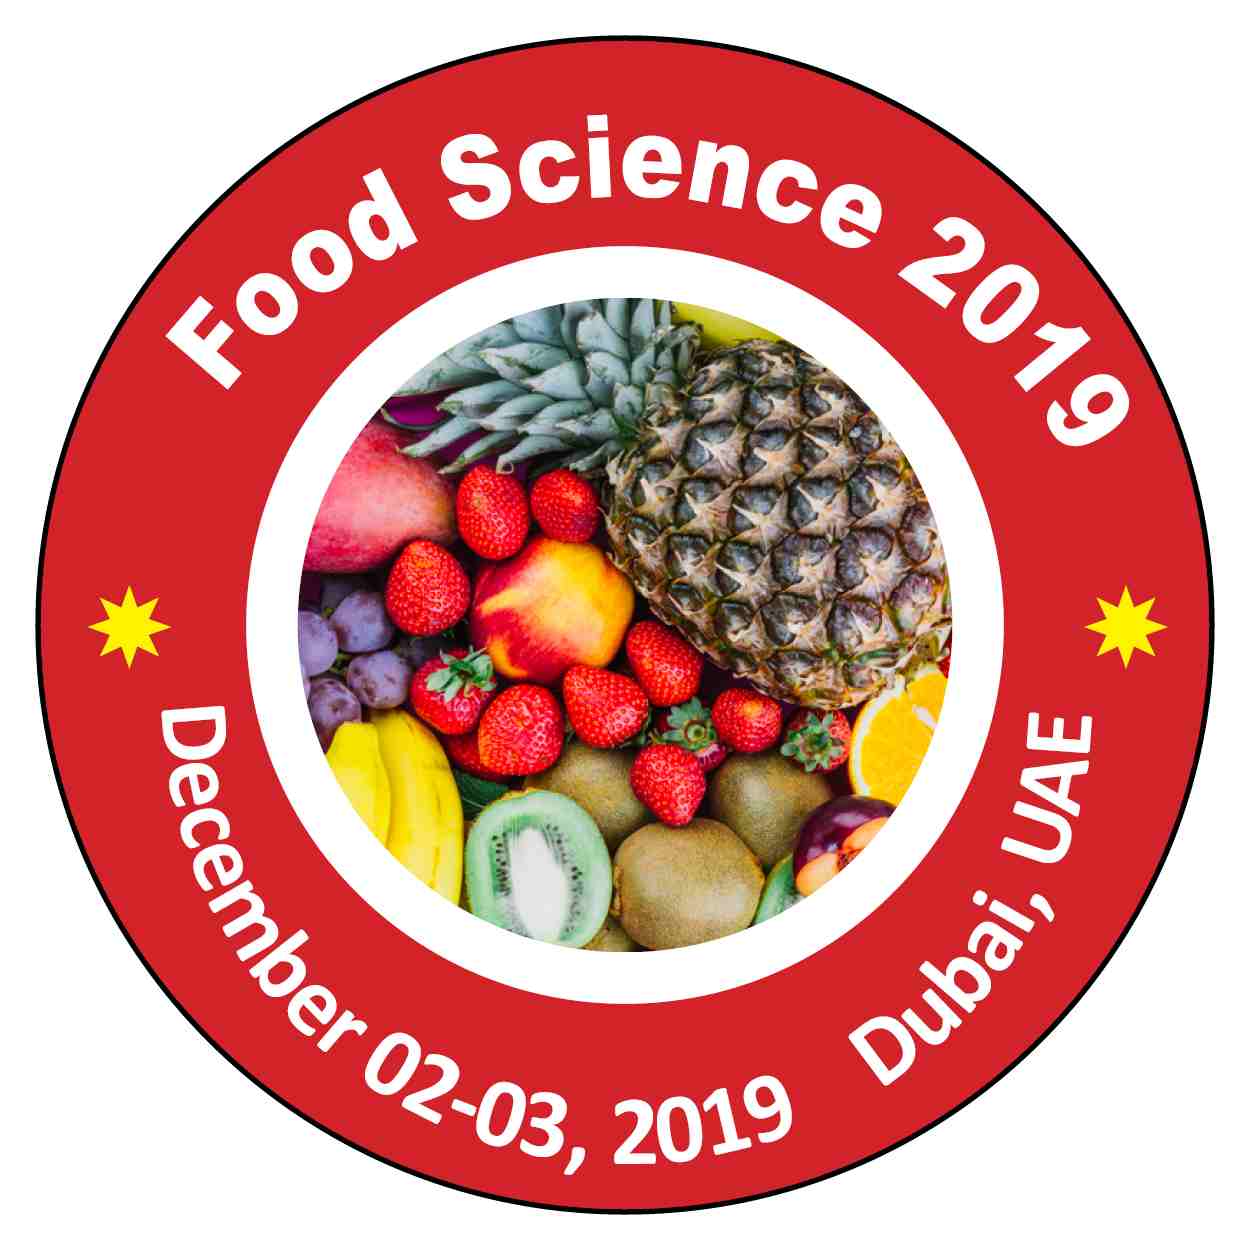 Top Food science conference 2019